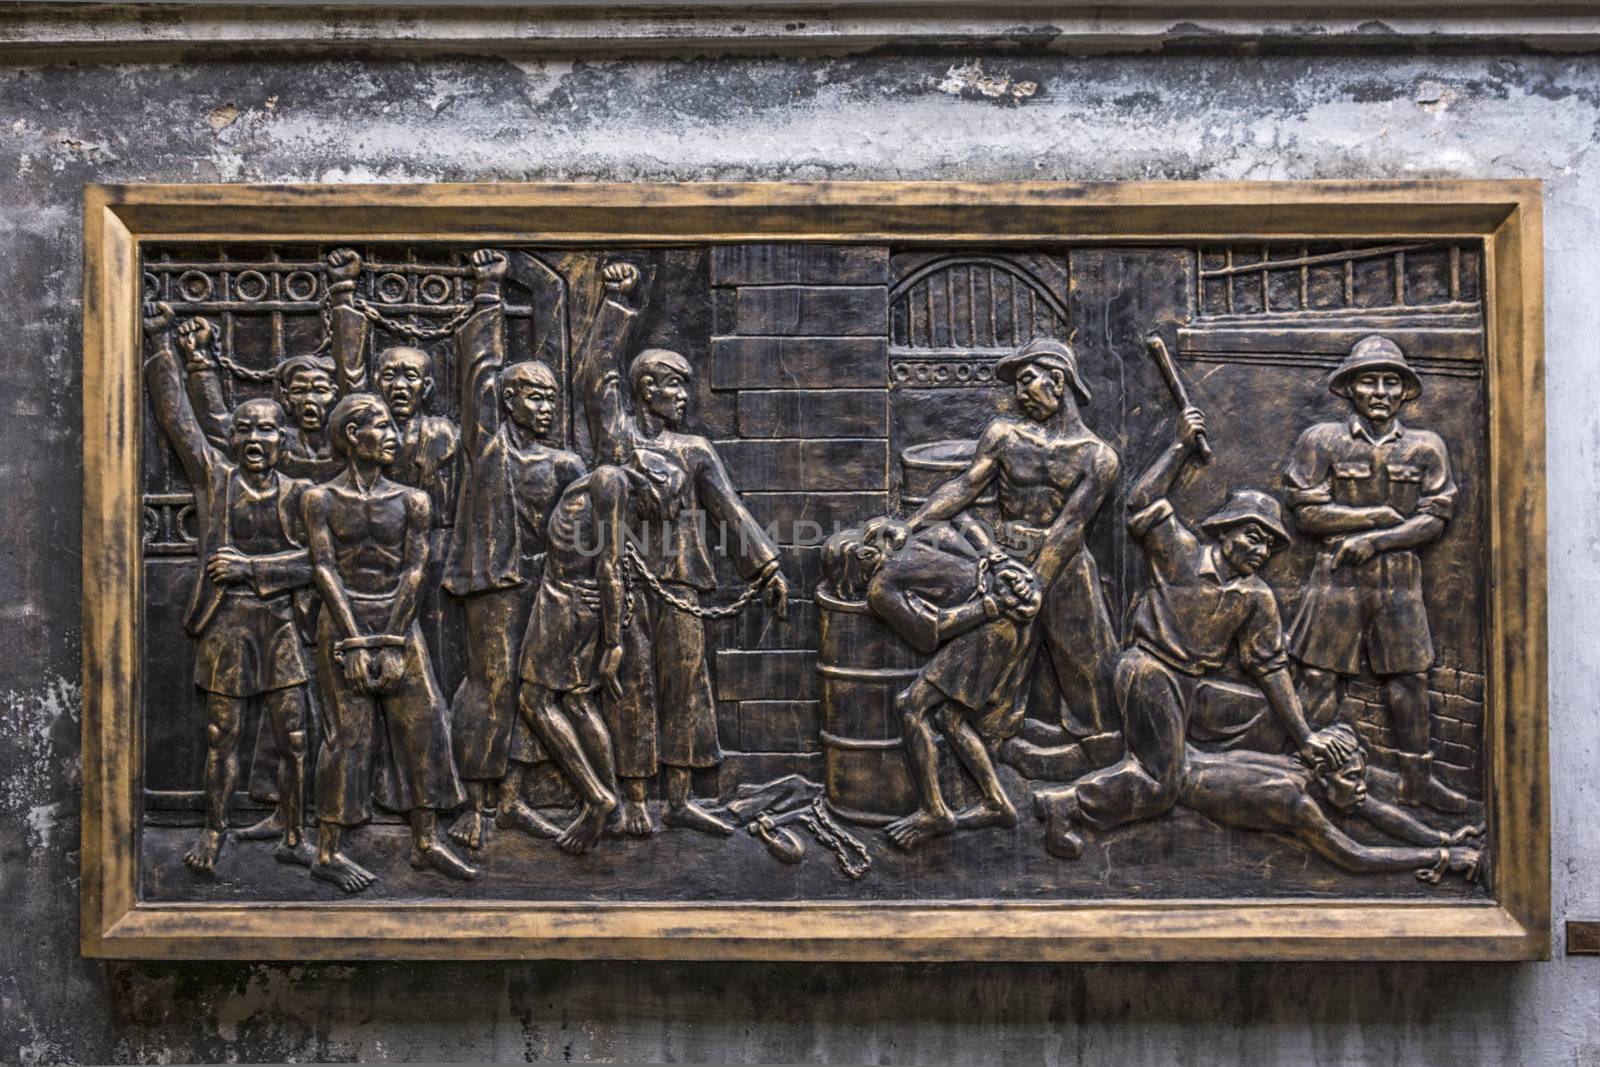 Mural in Hoa Lo Prison depicting brutal treatment by French. by Claudine